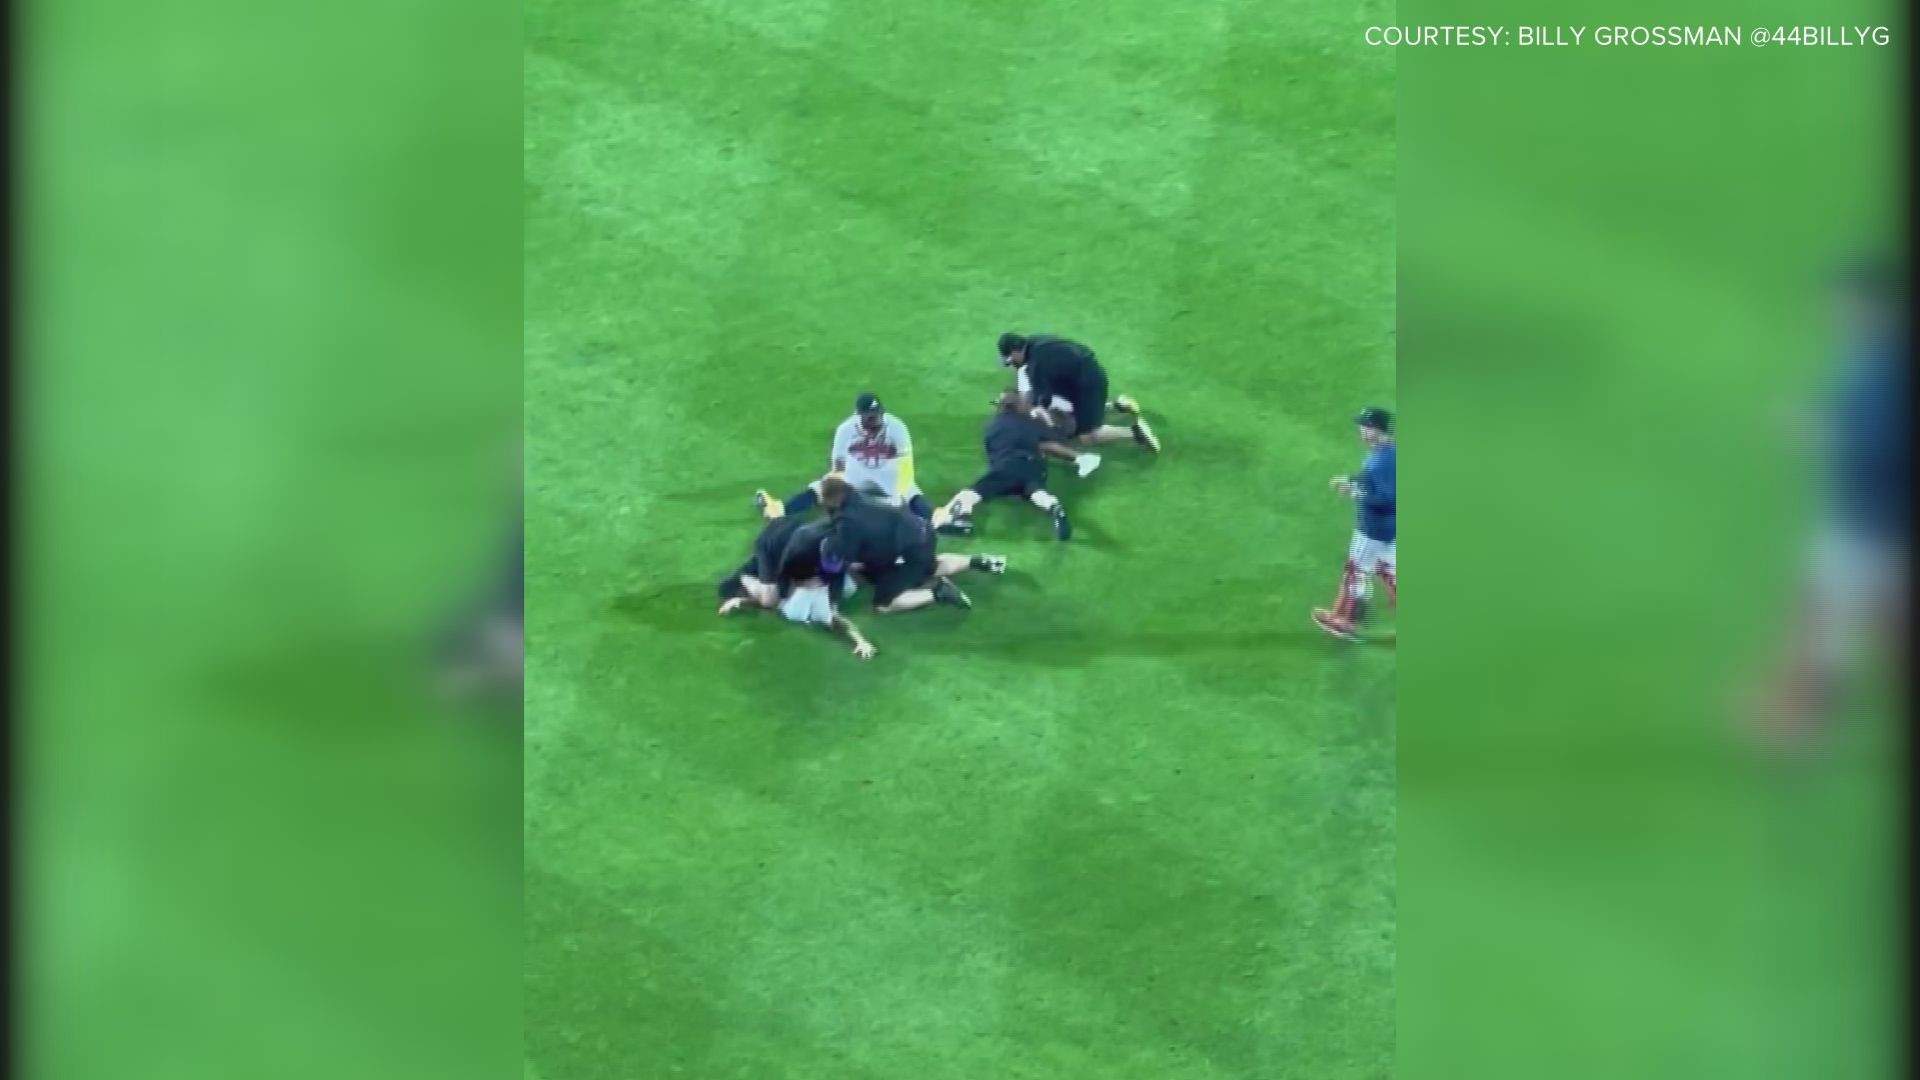 WATCH: Ronald Acuña Jr. Knocked To Ground by Fans Who Stormed Field During  Game